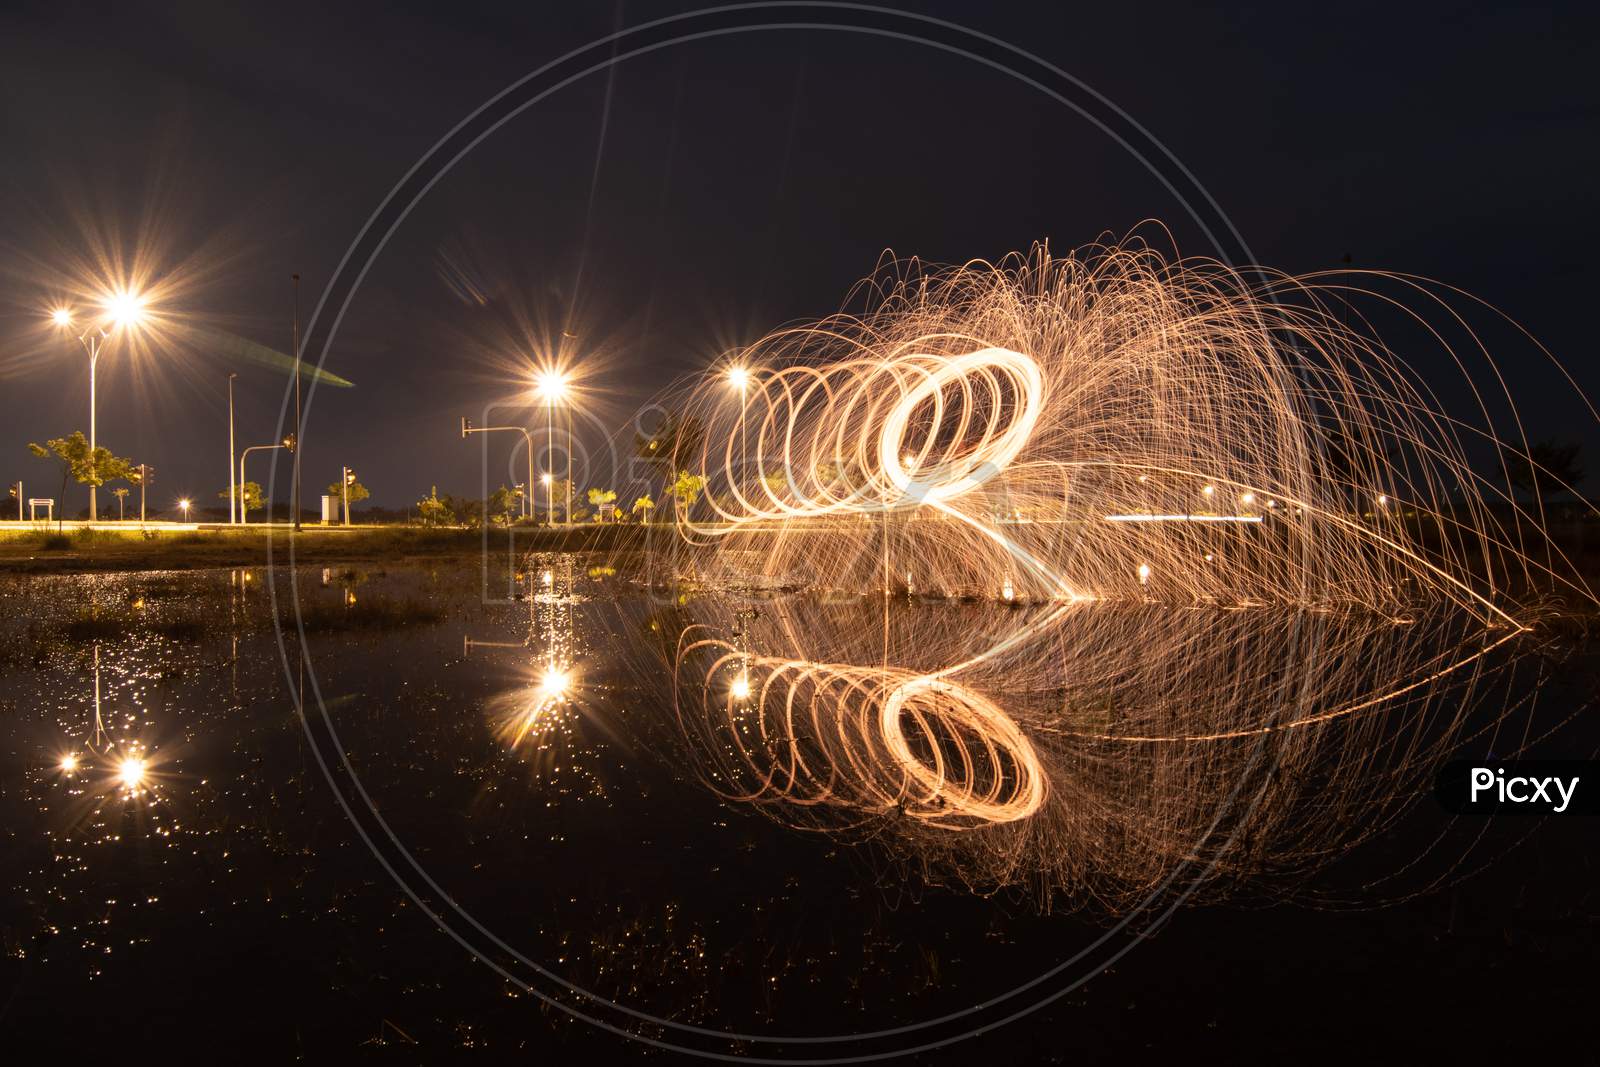 Fire Steel Wool With Reflection.